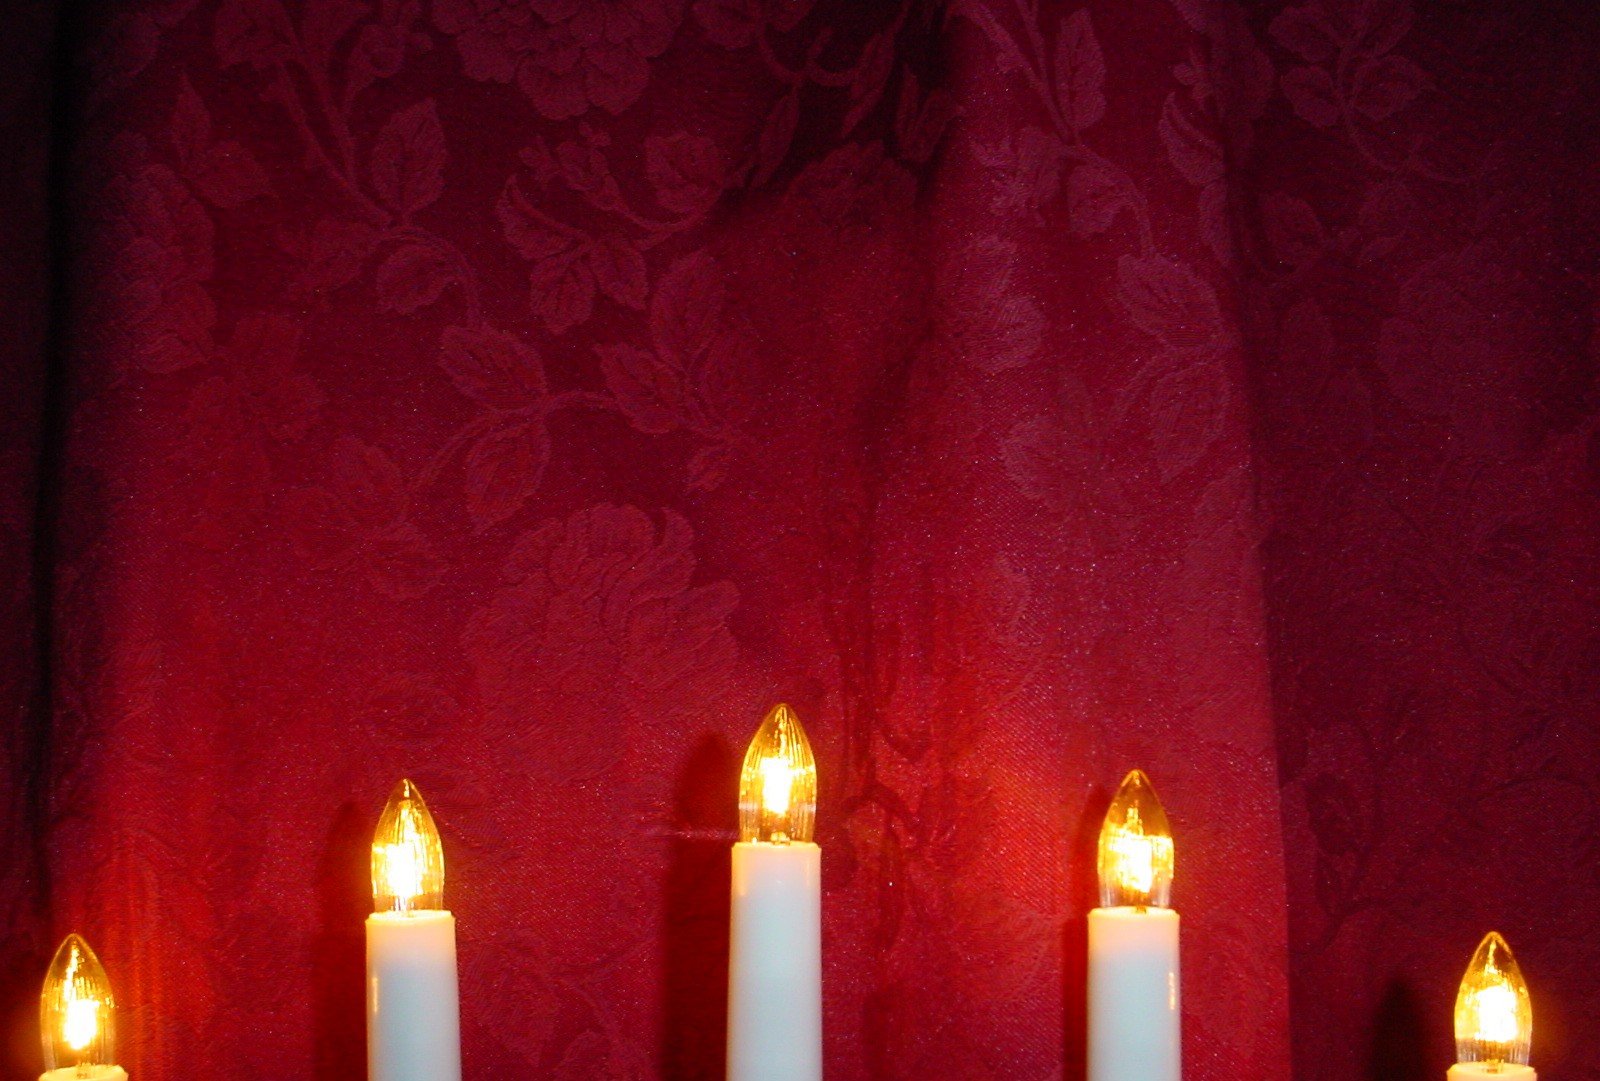 the candles are in rows against the red background